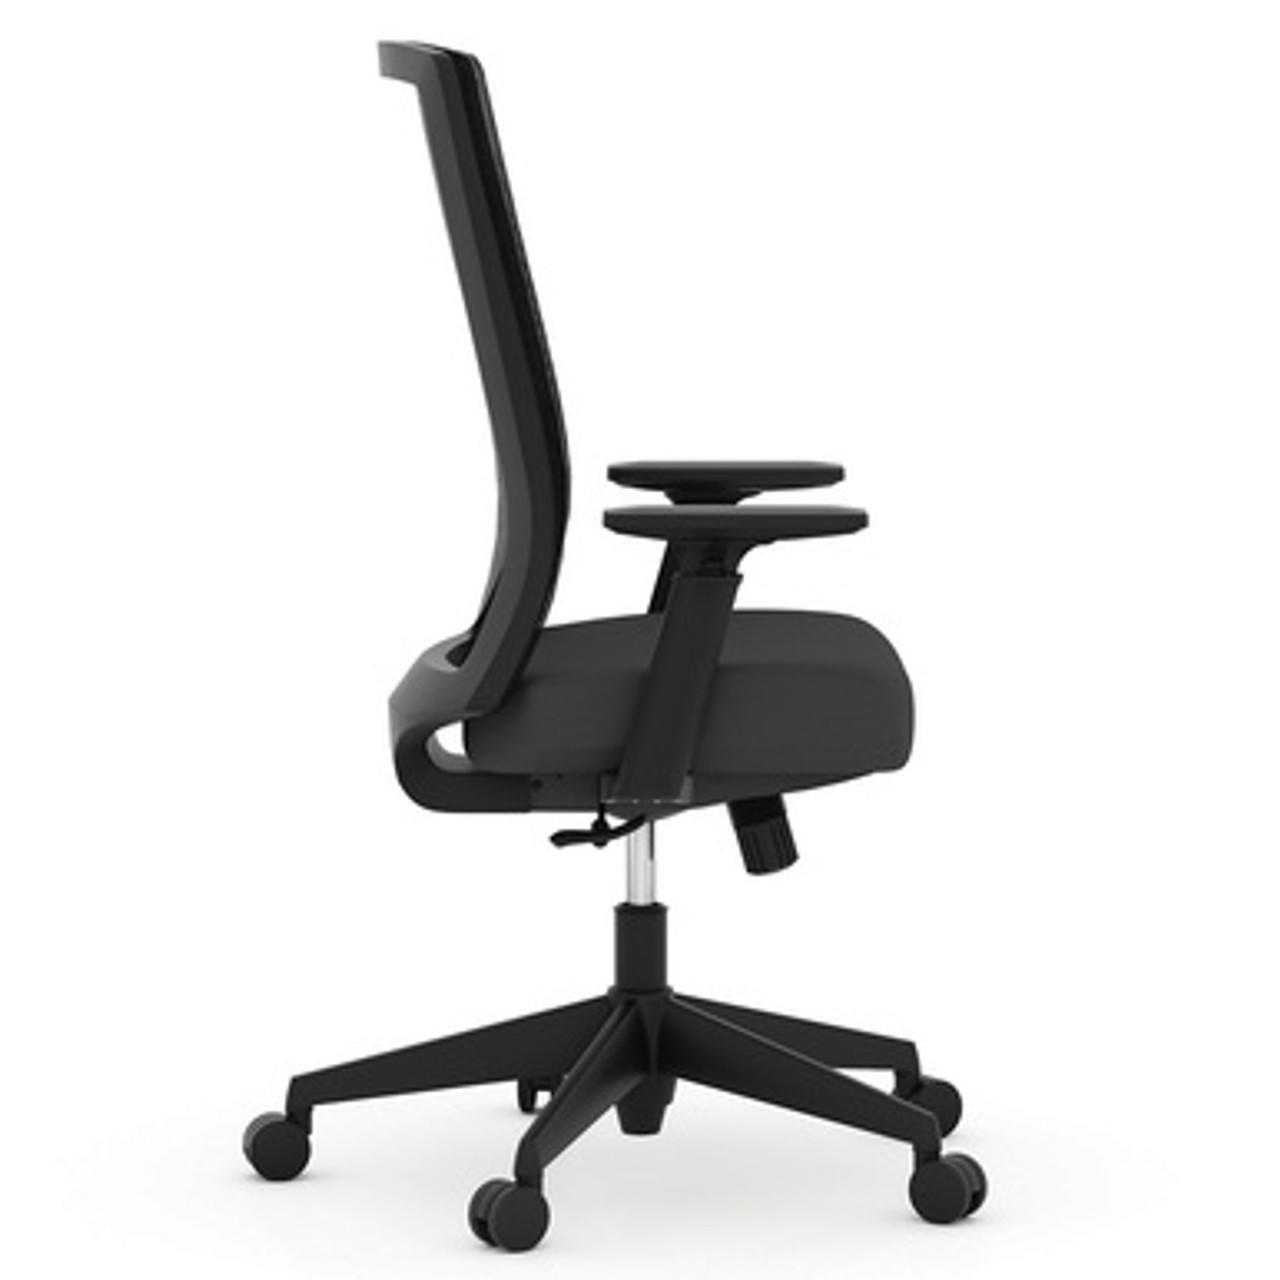  Office Source Cade Collection Executive Mesh Chair 44021ANSF 